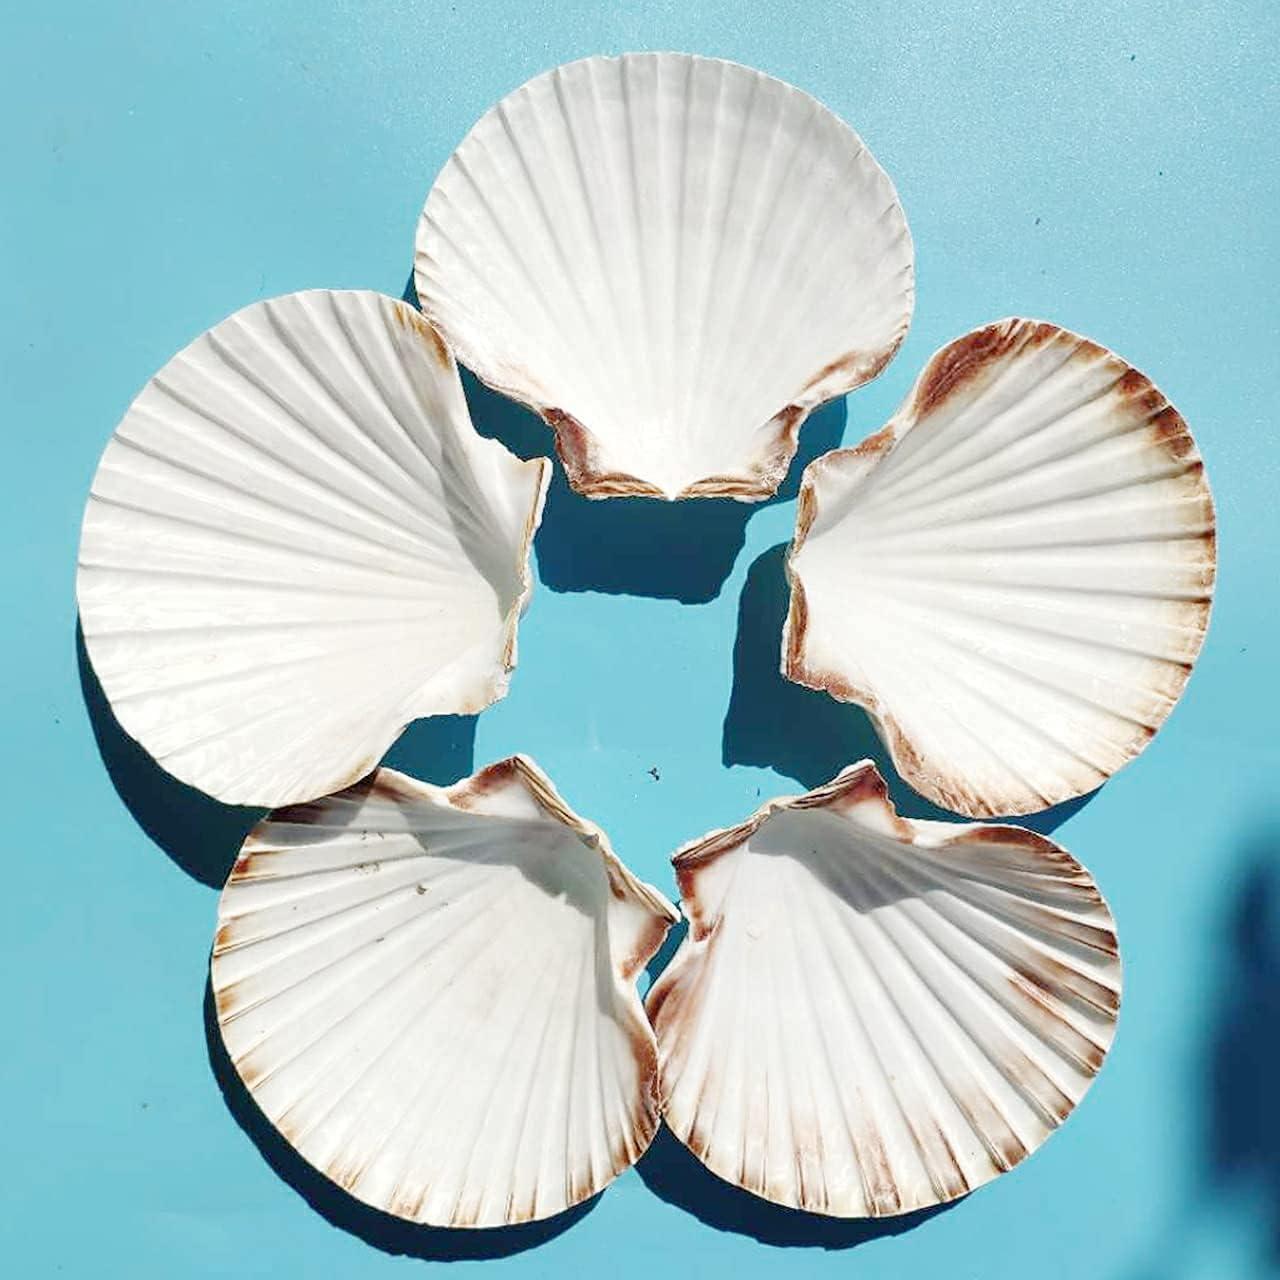  HOHUCRAB 6pcs 4-5inch Scallop Shells, Natural Large Scallop,  Sea Shells for Crafting, Seashells Beach Decorations for Home, Beaching  Wedding Decoration : Home & Kitchen